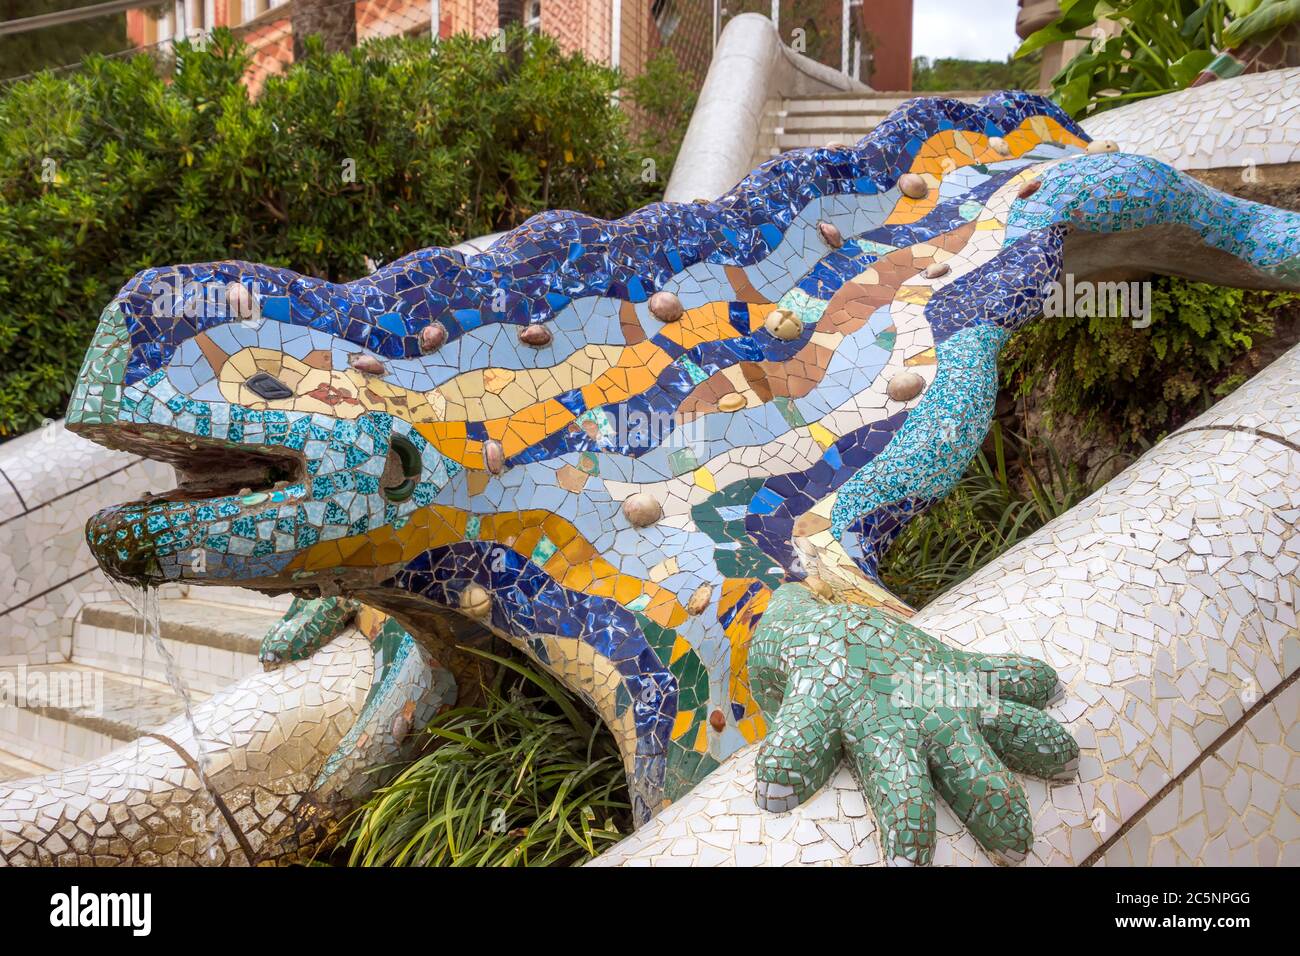 BARCELONA, SPAIN - JULY 3, 2016: Lizard of Gaudi mosaic in park Guell in  Barcelona. Park Guell (1914) is the famous architectural town art designed  by Stock Photo - Alamy